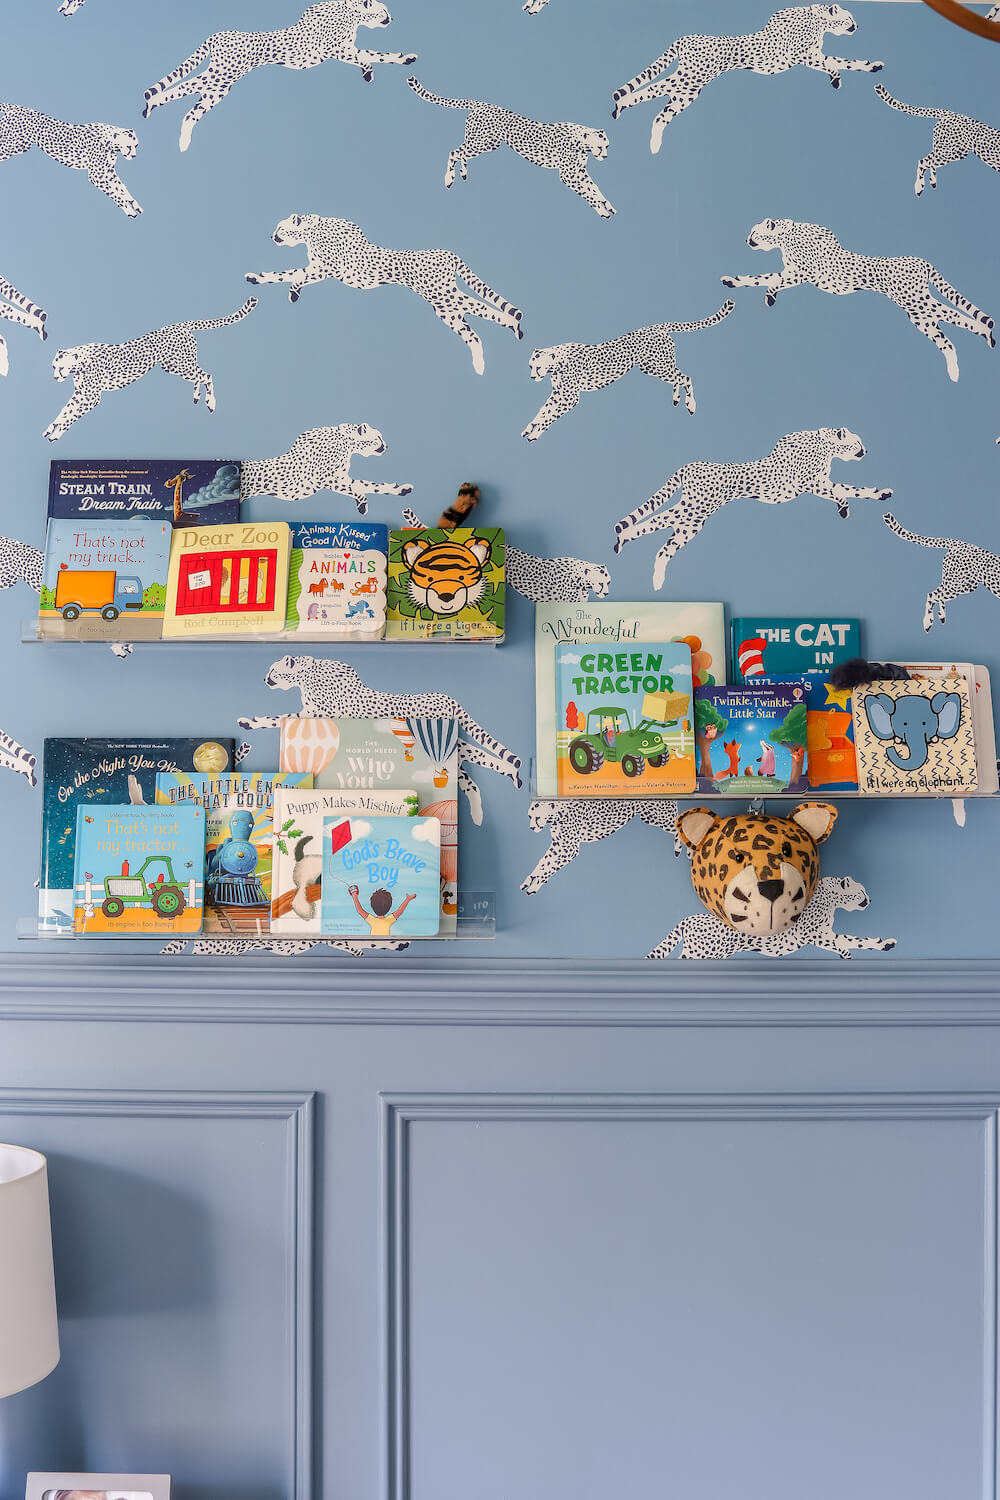 acrylic shelves with books in adventure themed nursery with leopard wallpaper